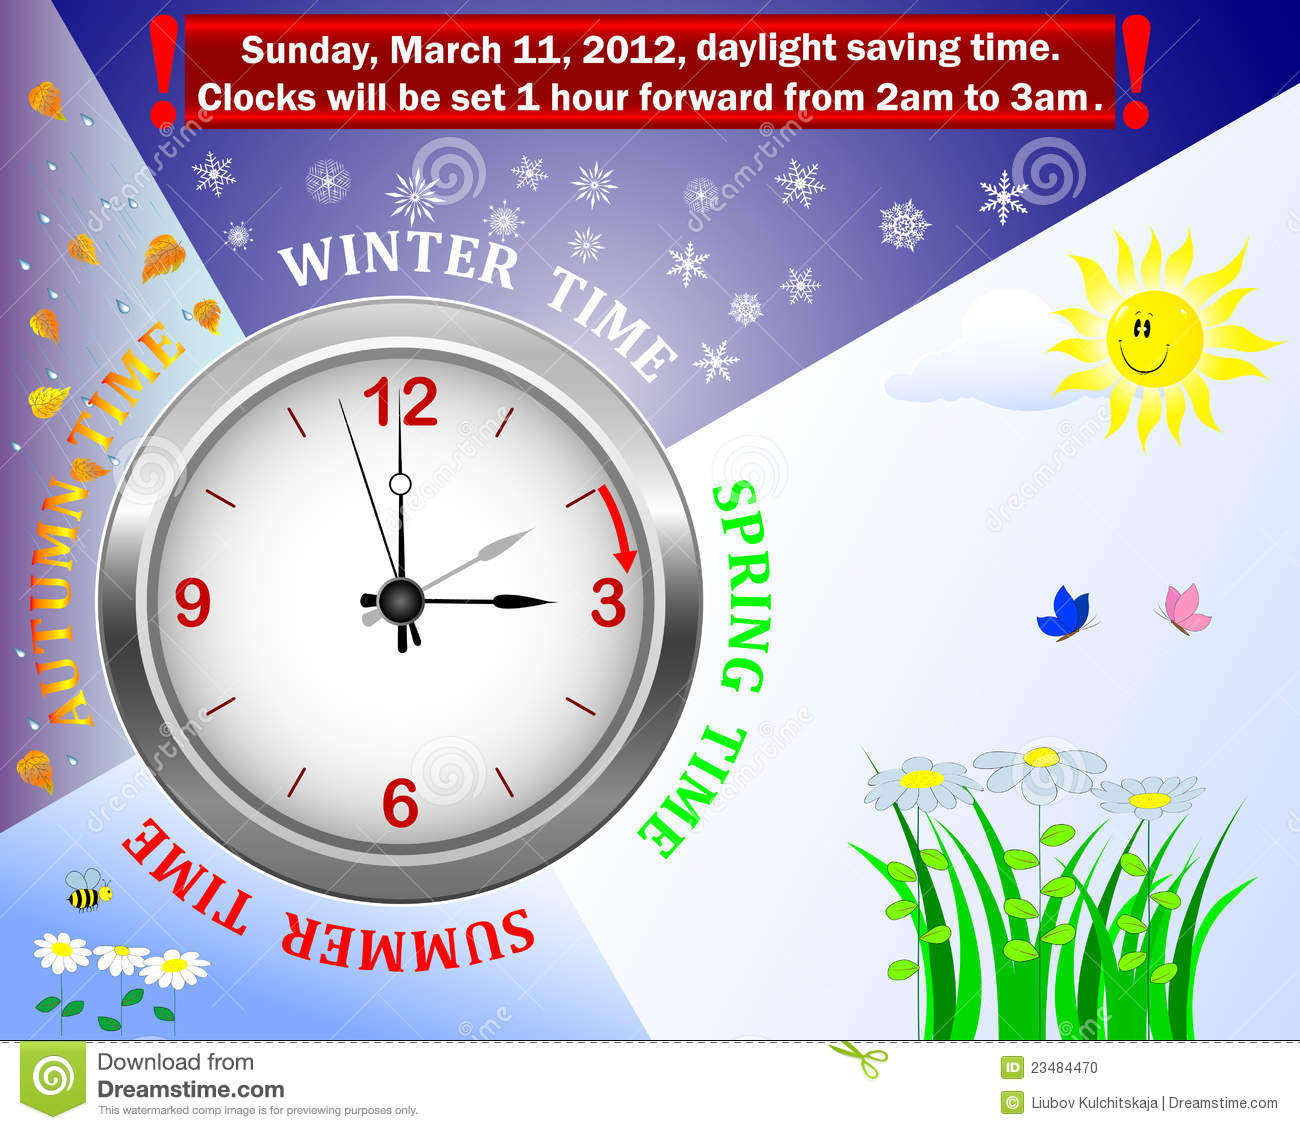 Daylight Saving Time Begins  Icon Clock With Four Seasons Of The Year    